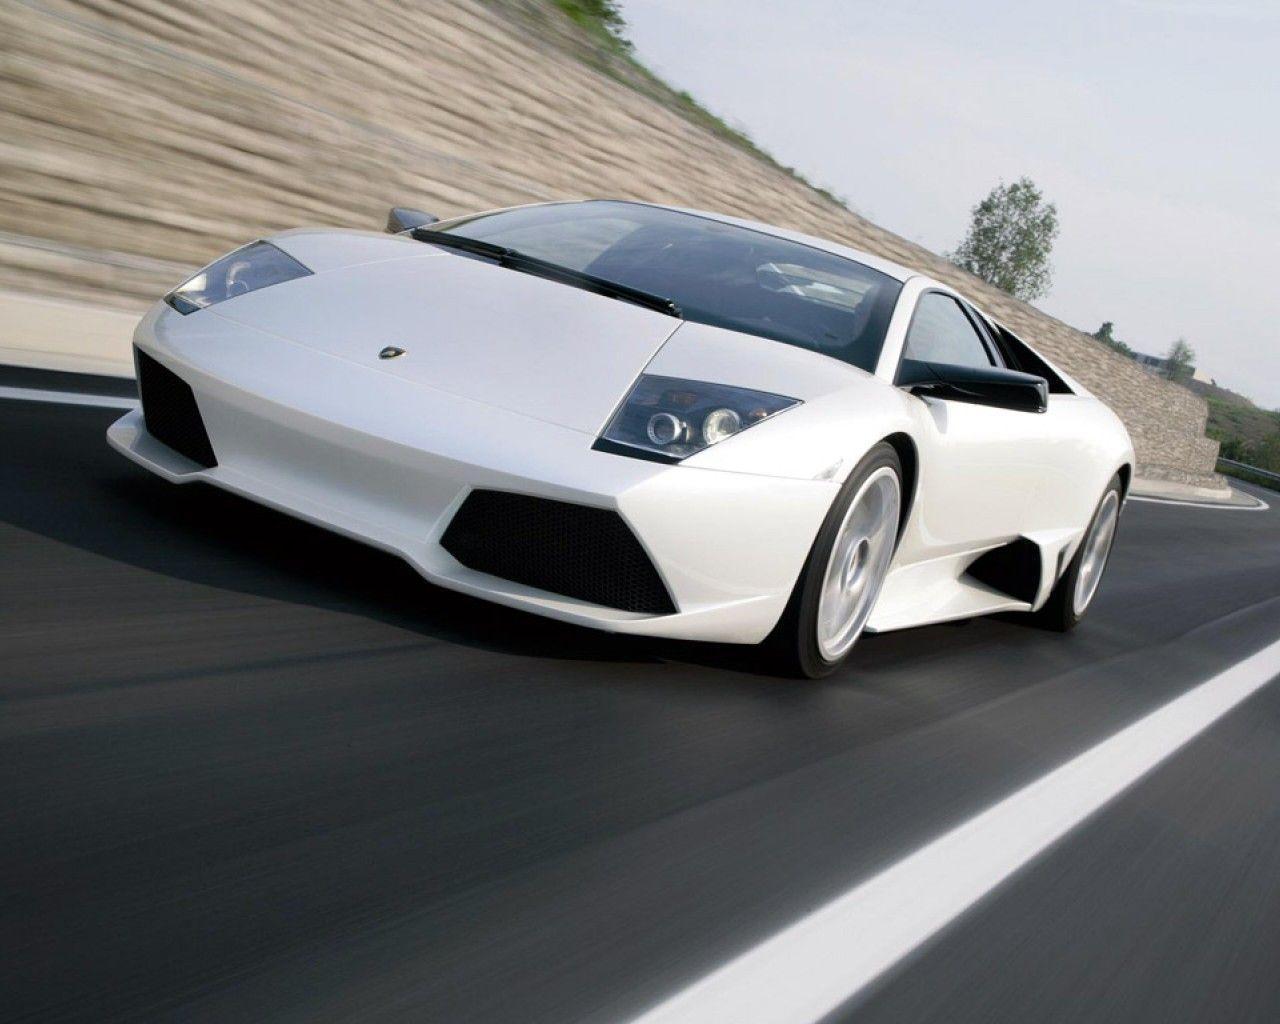 Fastest Car in The World Wallpaper Cool Wallpaper For 1024x768PX